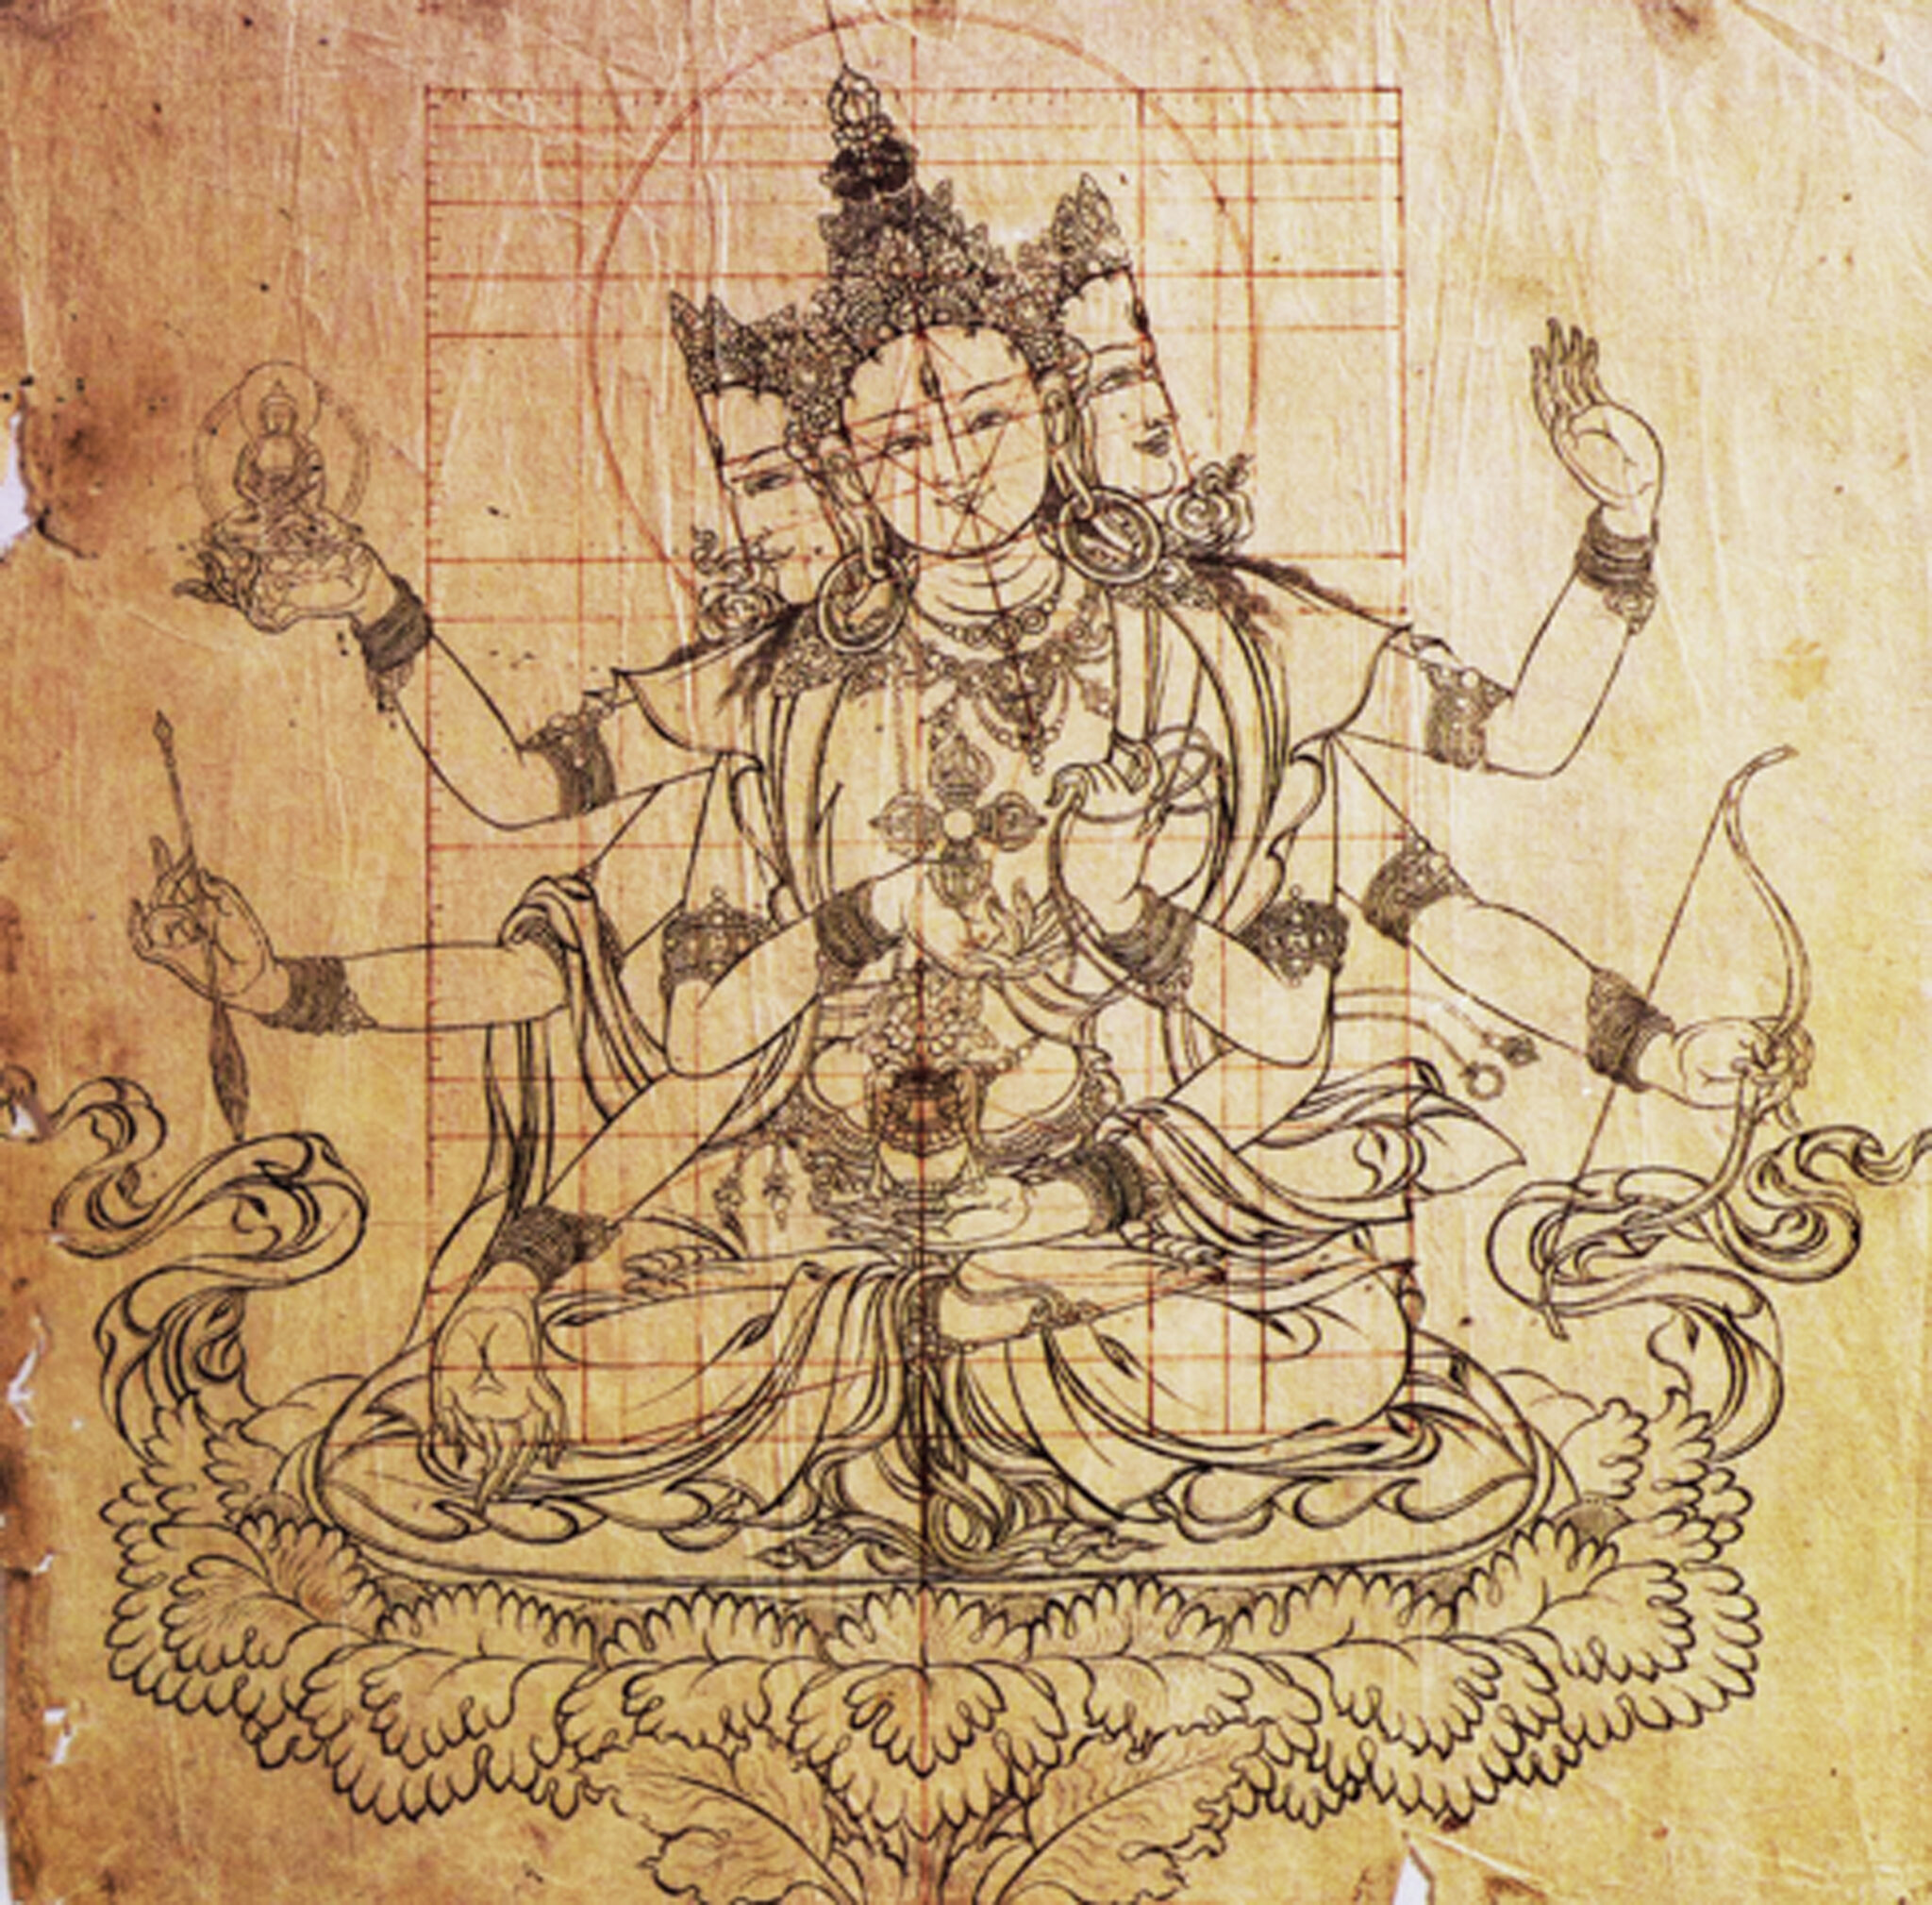 Line drawing depicting three-faced, eight-armed deity with red graph superimposed over body and head